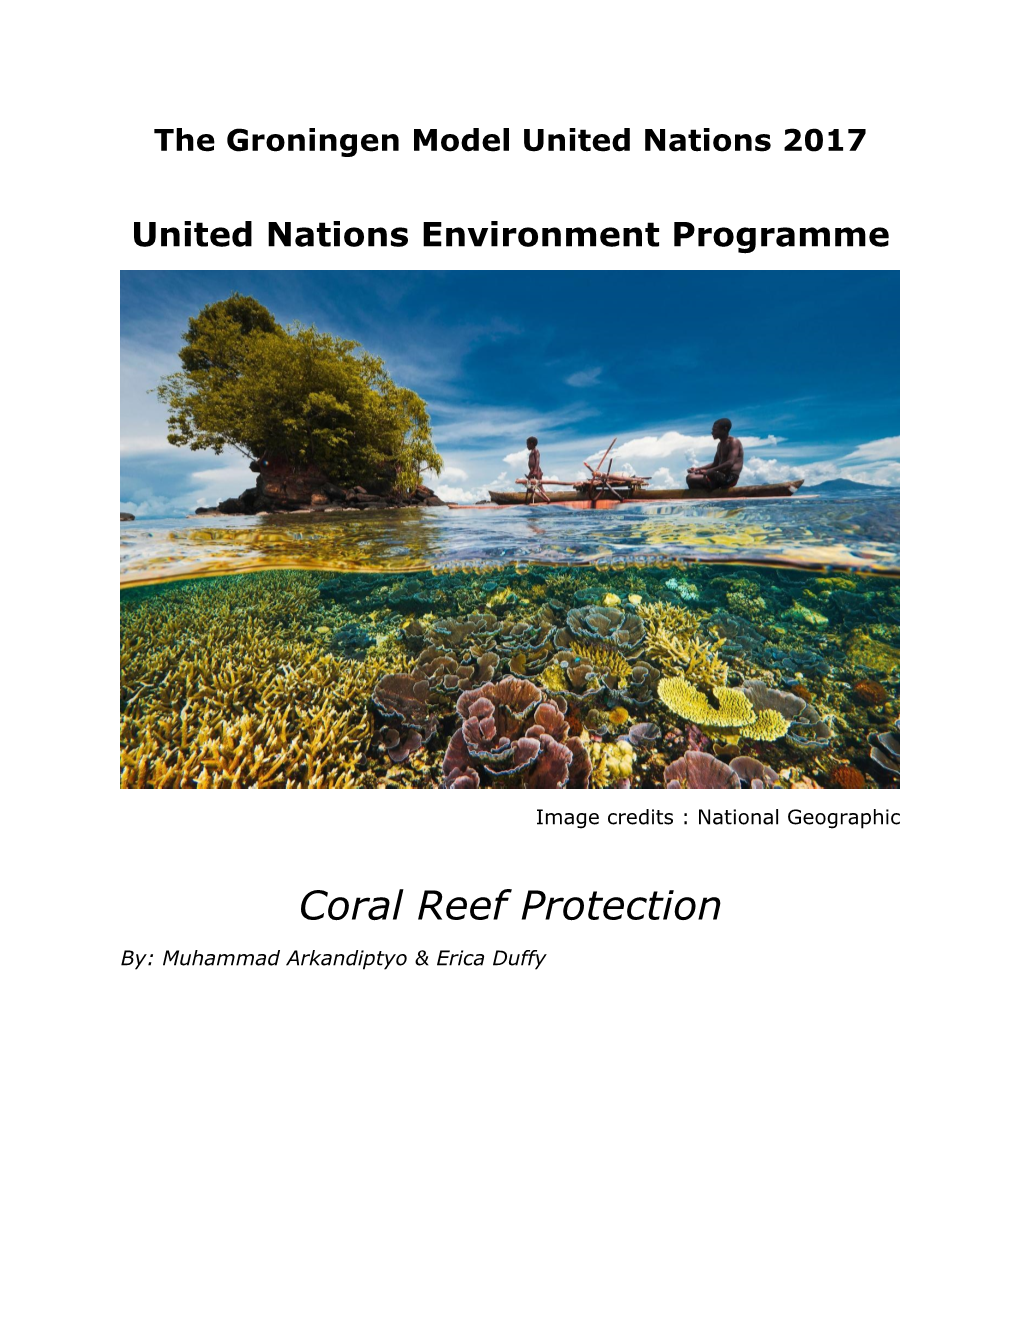 Coral Reef Protection